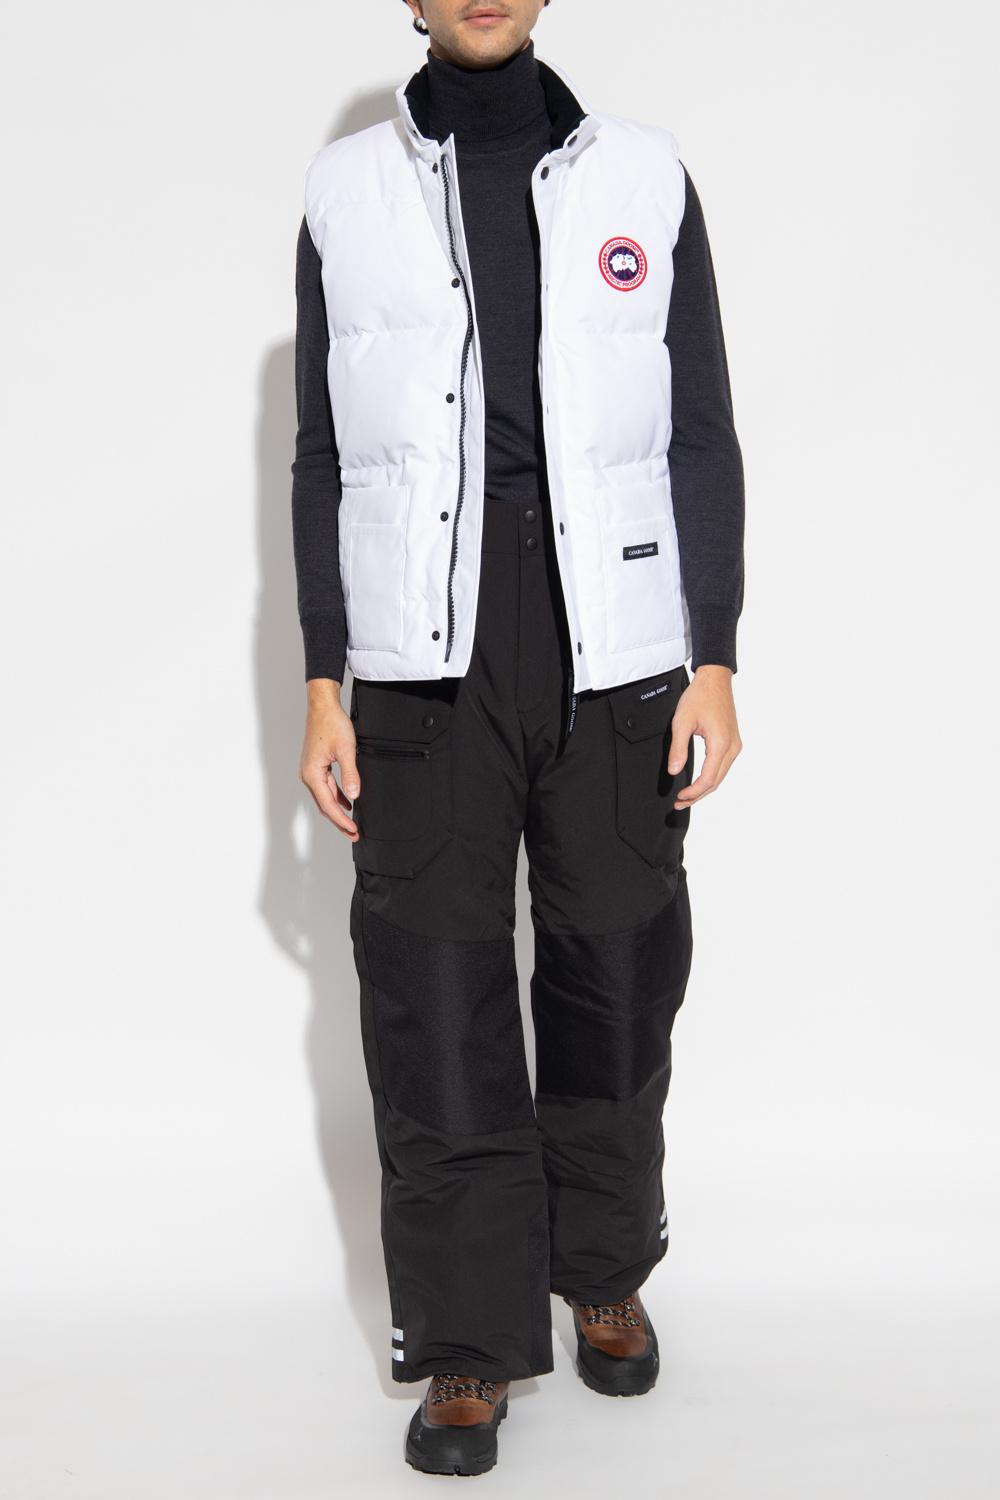 Canada Goose 'tundra' Ski Trousers in Black for Men | Lyst